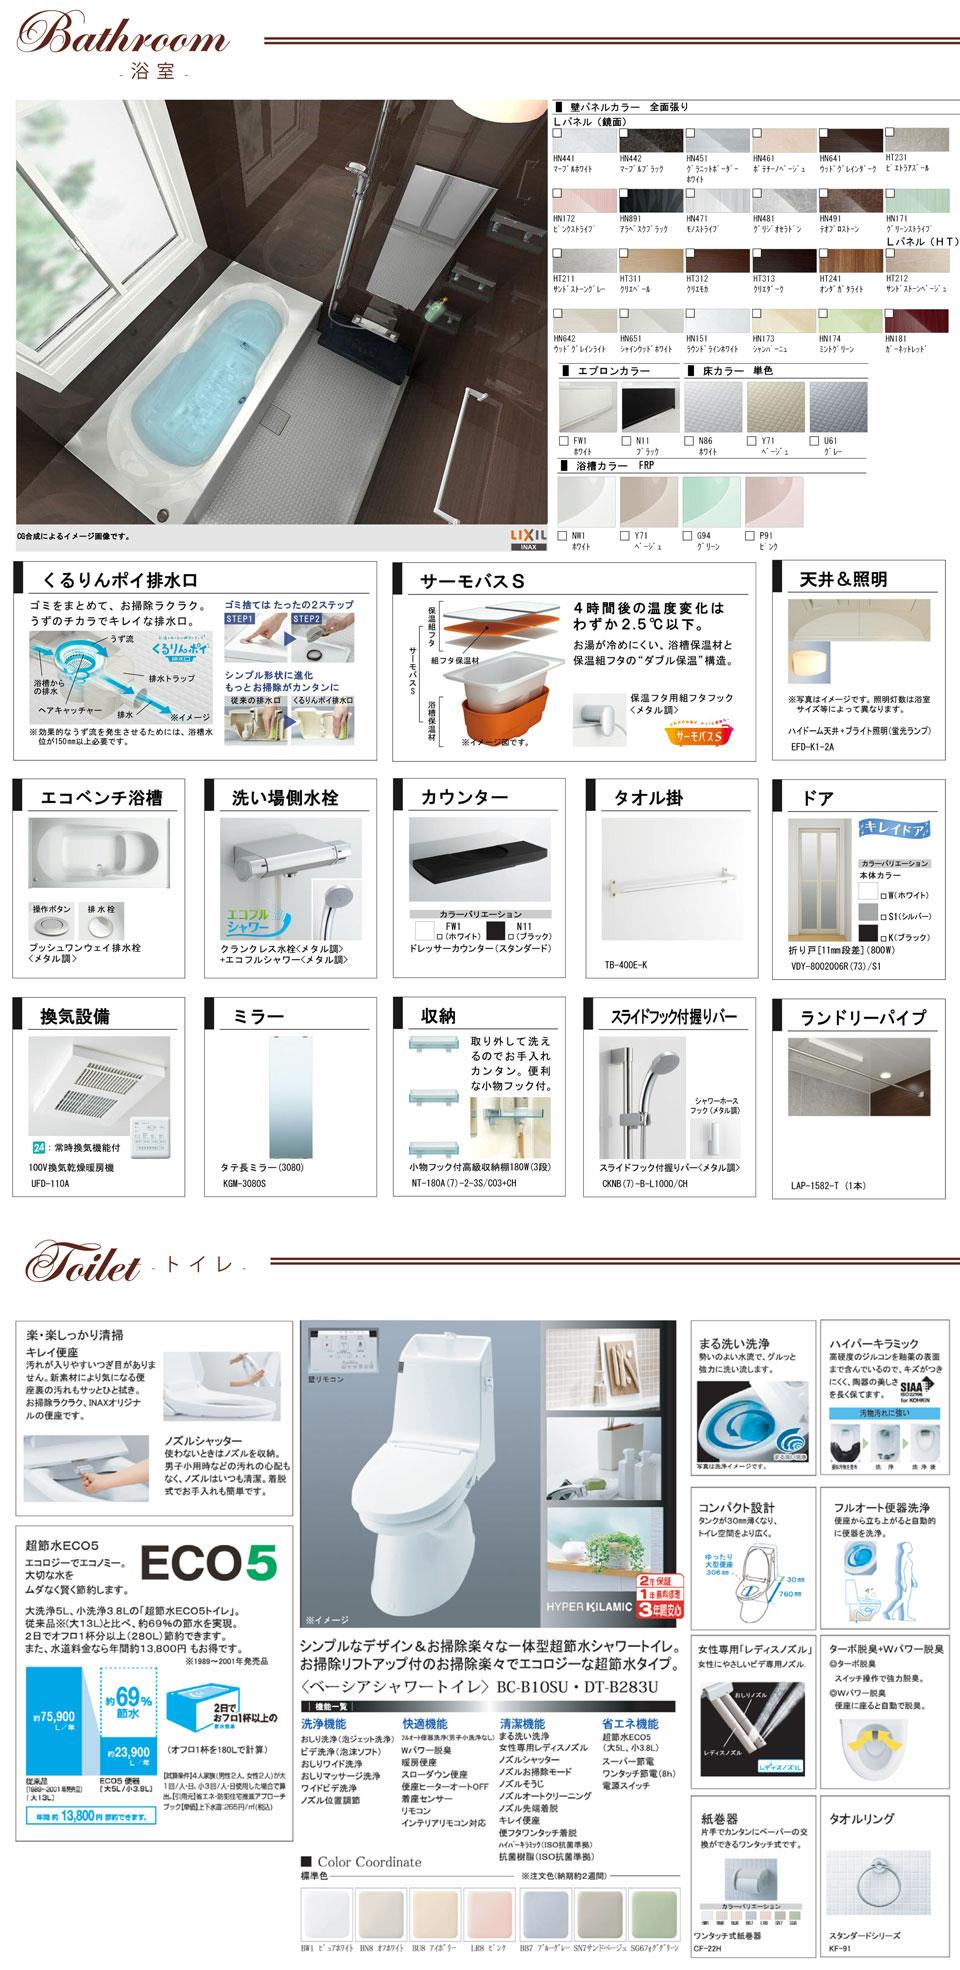 Other. Standard specification: bathroom ・ toilet